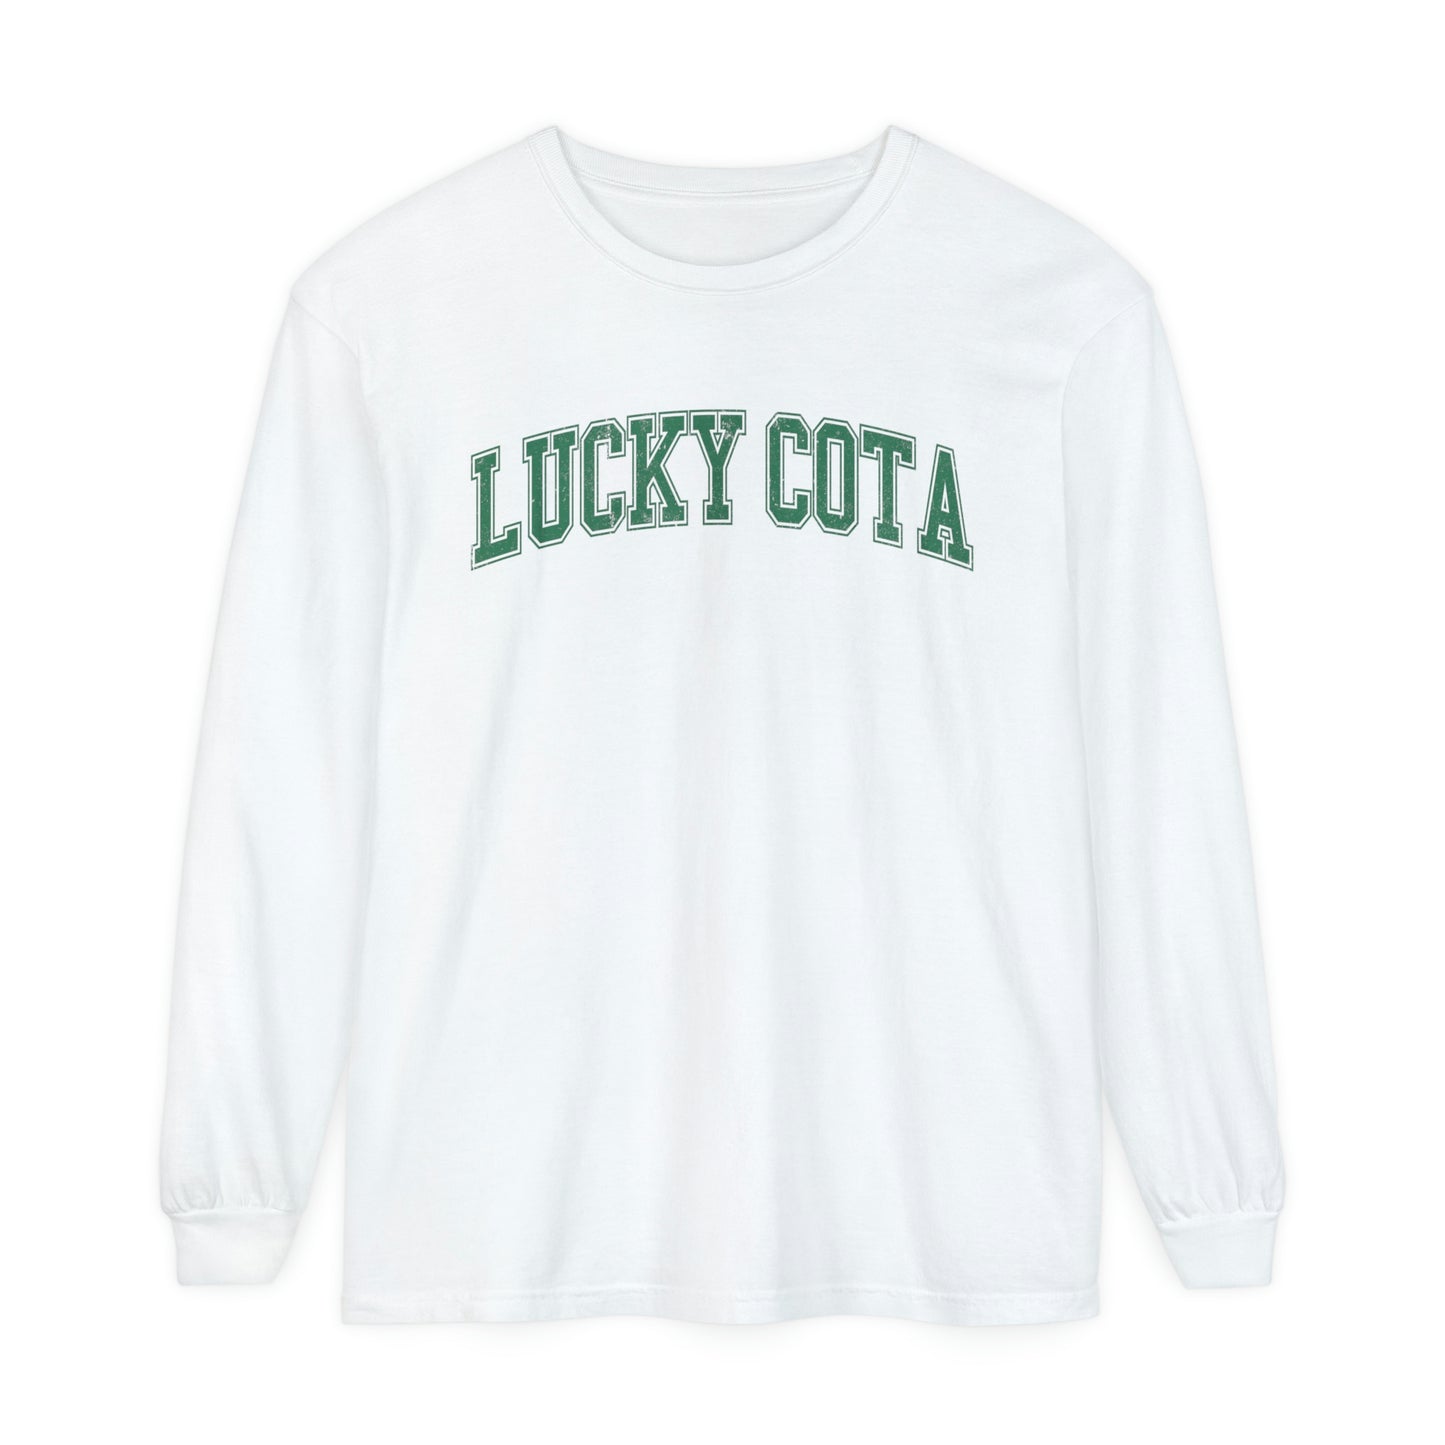 Lucky COTA Distressed Long Sleeve Comfort Colors T-Shirt